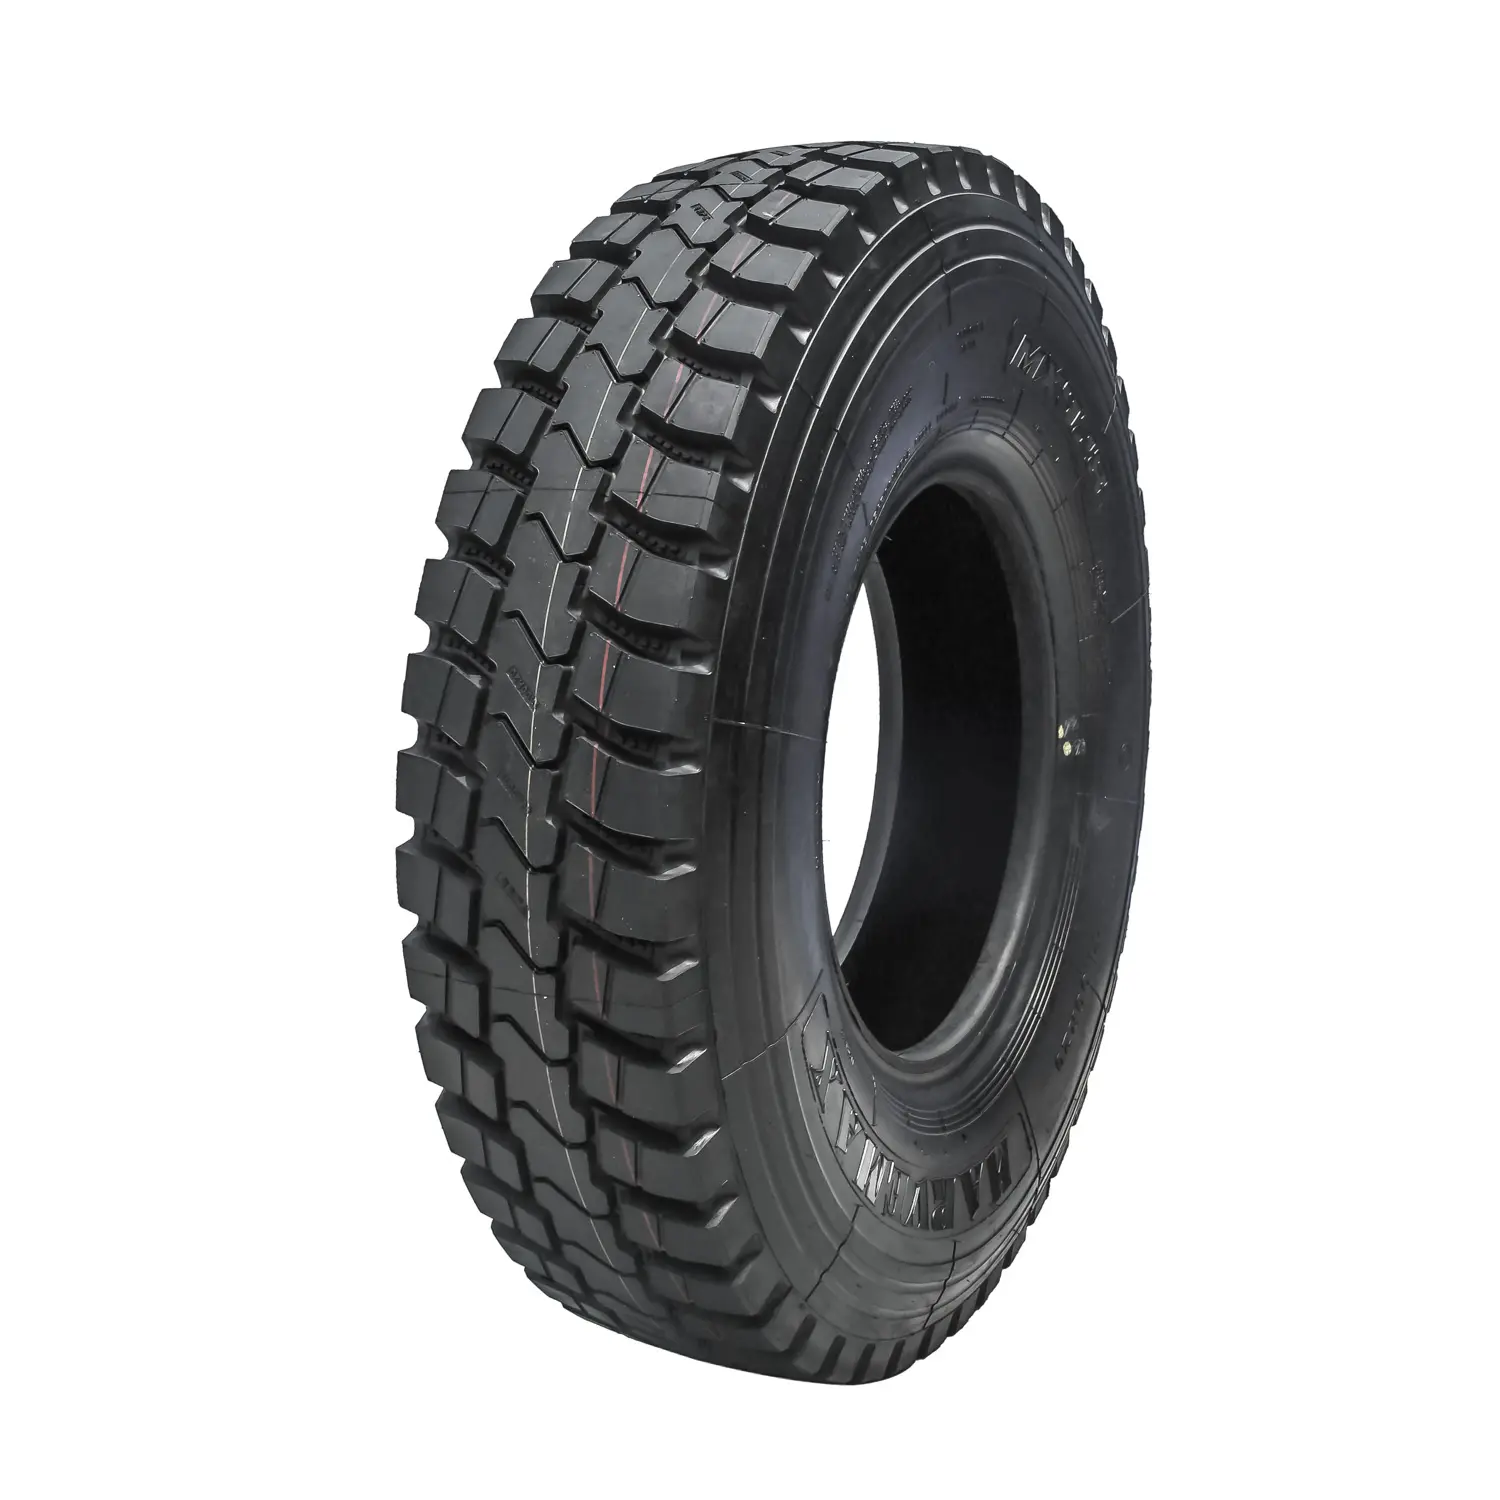 China brand SUPERHAWK HAWKWAY 11.00R20 HK728 radial truck&bus tires tyres with good price